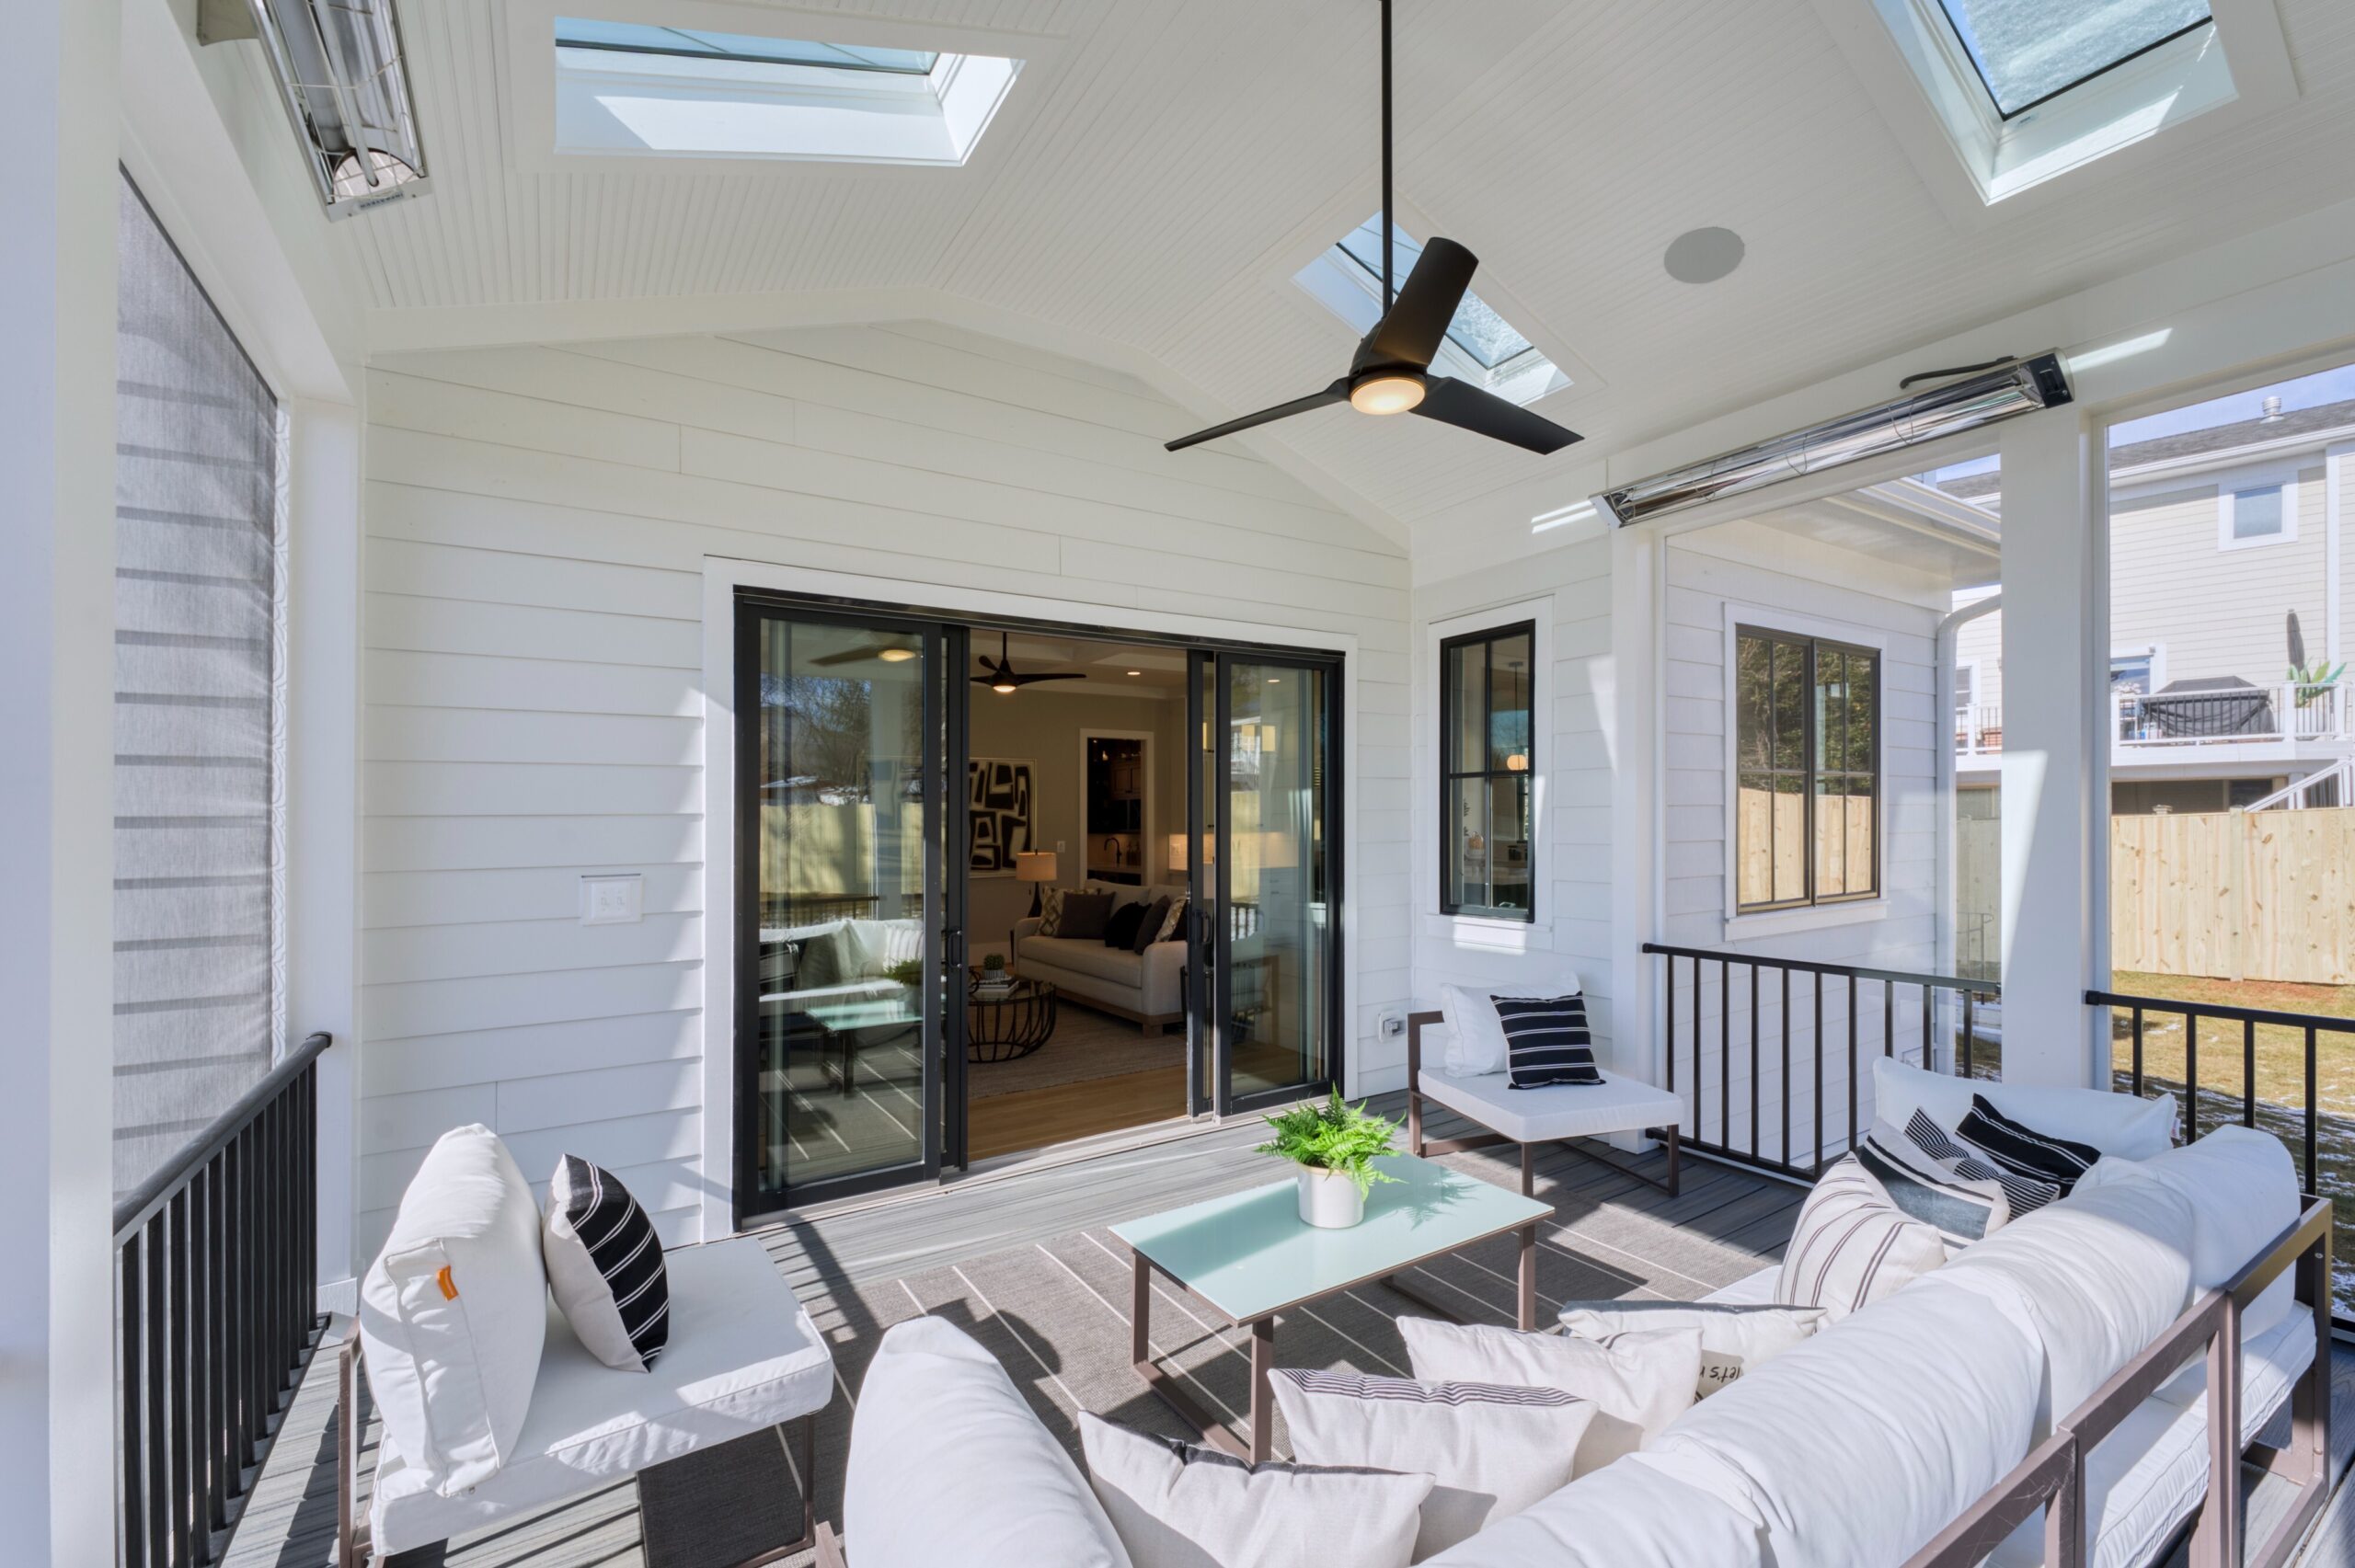 Professional interior photo of 1624 Dempsey St, McLean, VA - showing the inside of the screened porch looking toward the door to the main house, skylights, heaters, and ceiling fan